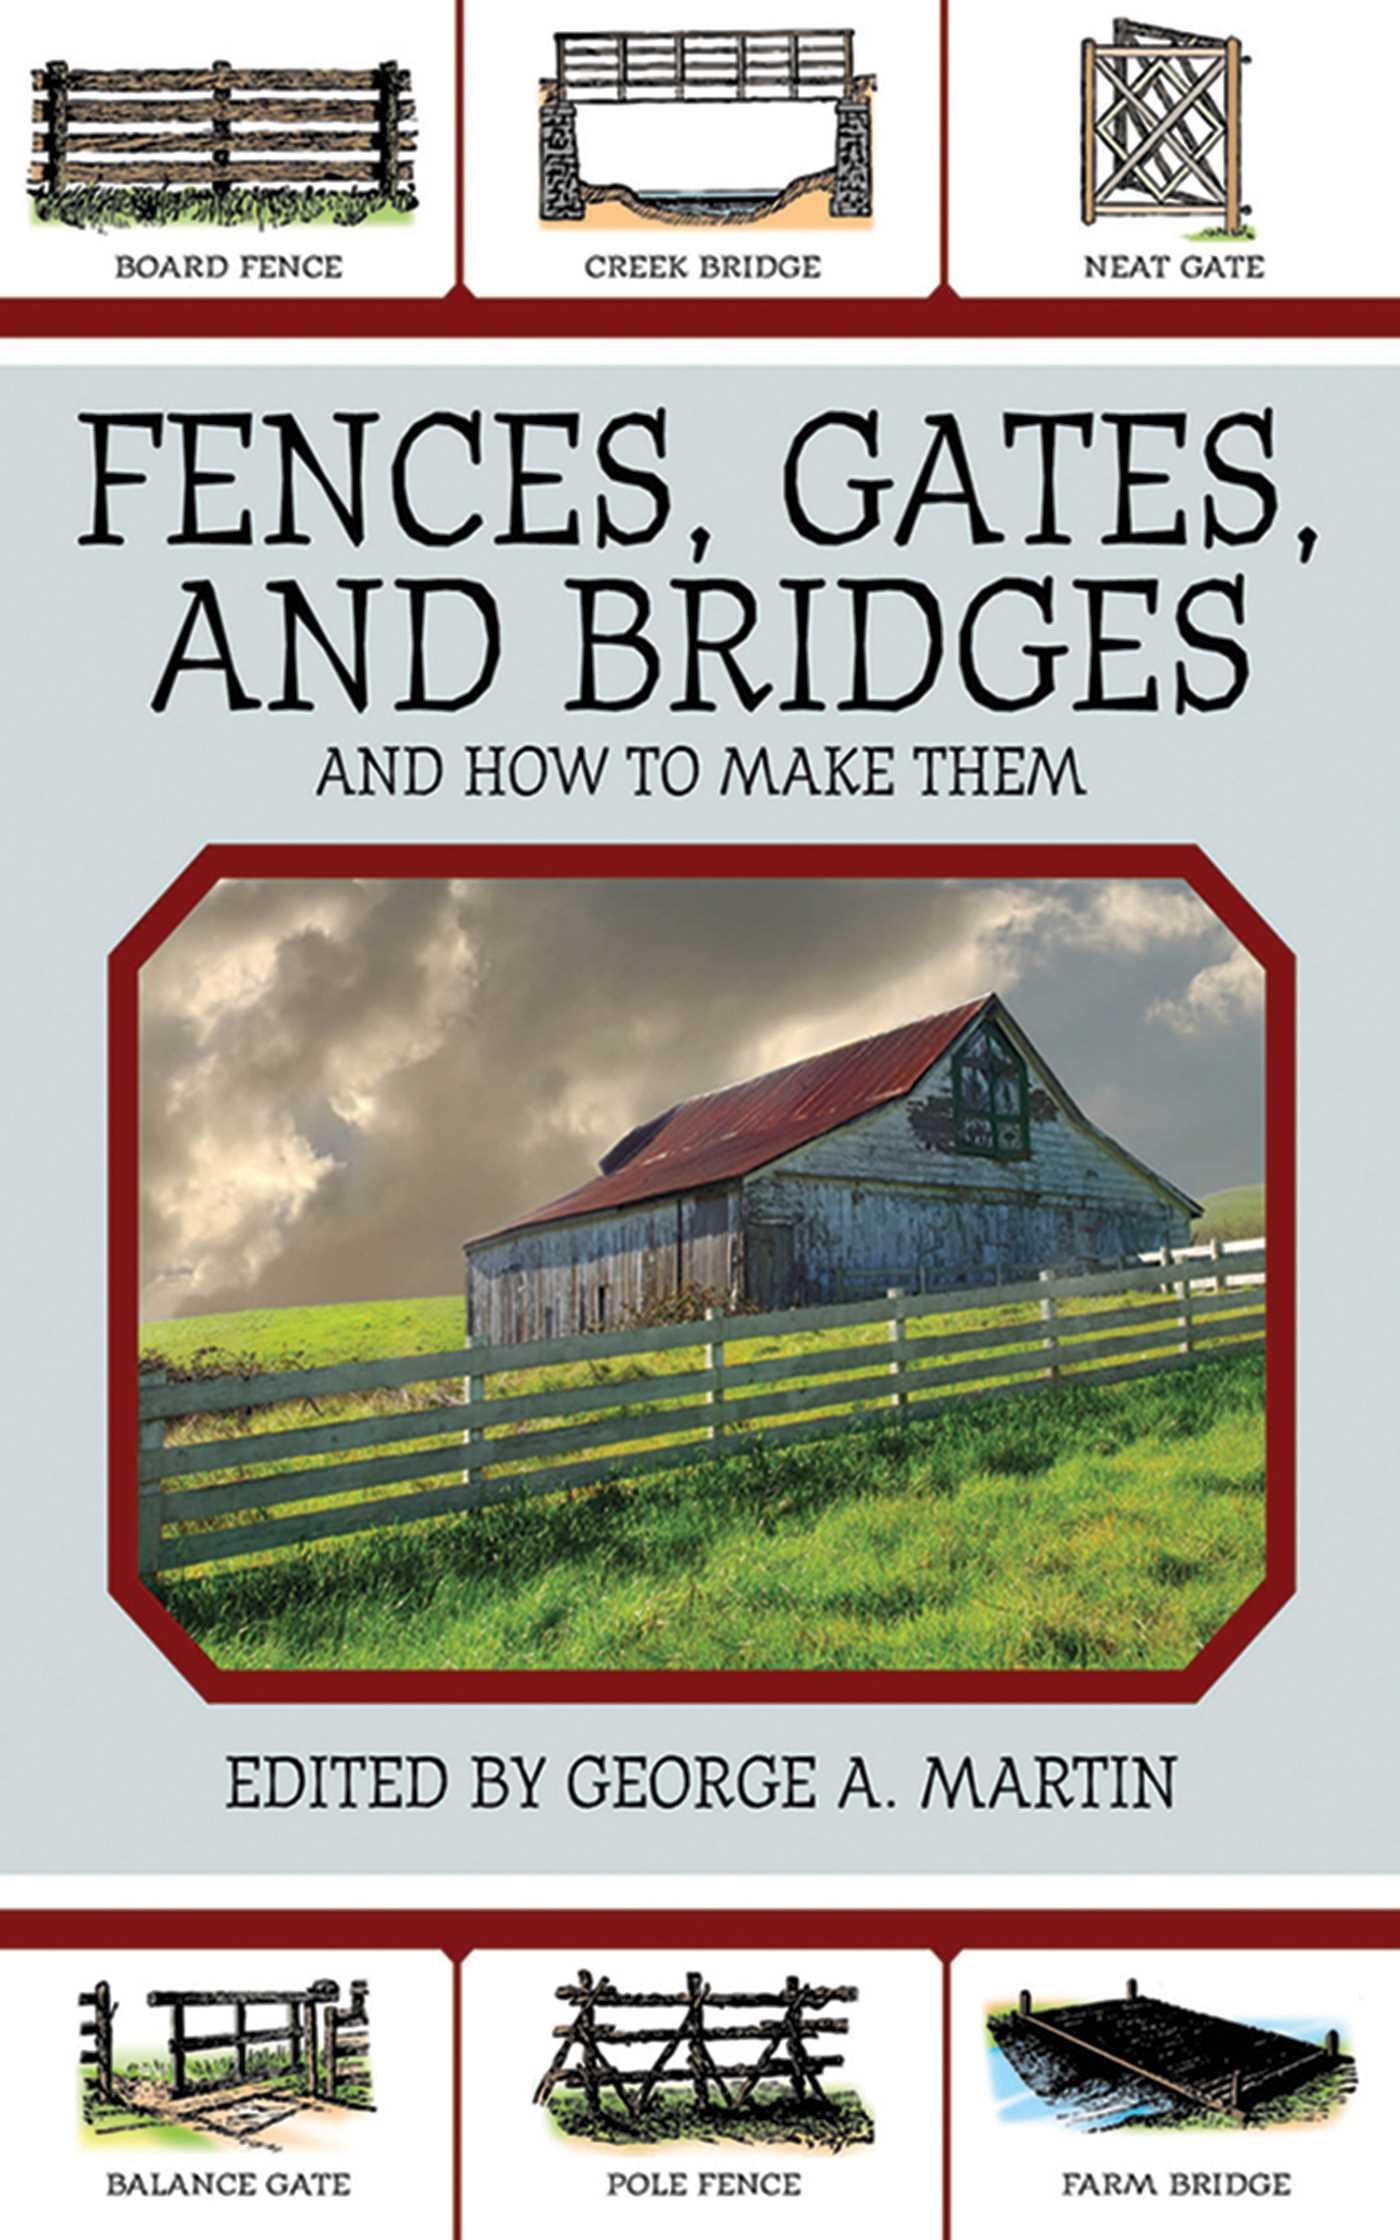 Fences, Gates, and Bridges / And How to Make Them / George A Martin / Taschenbuch / Englisch / 2011 / Skyhorse Publishing / EAN 9781616081294 - Martin, George A